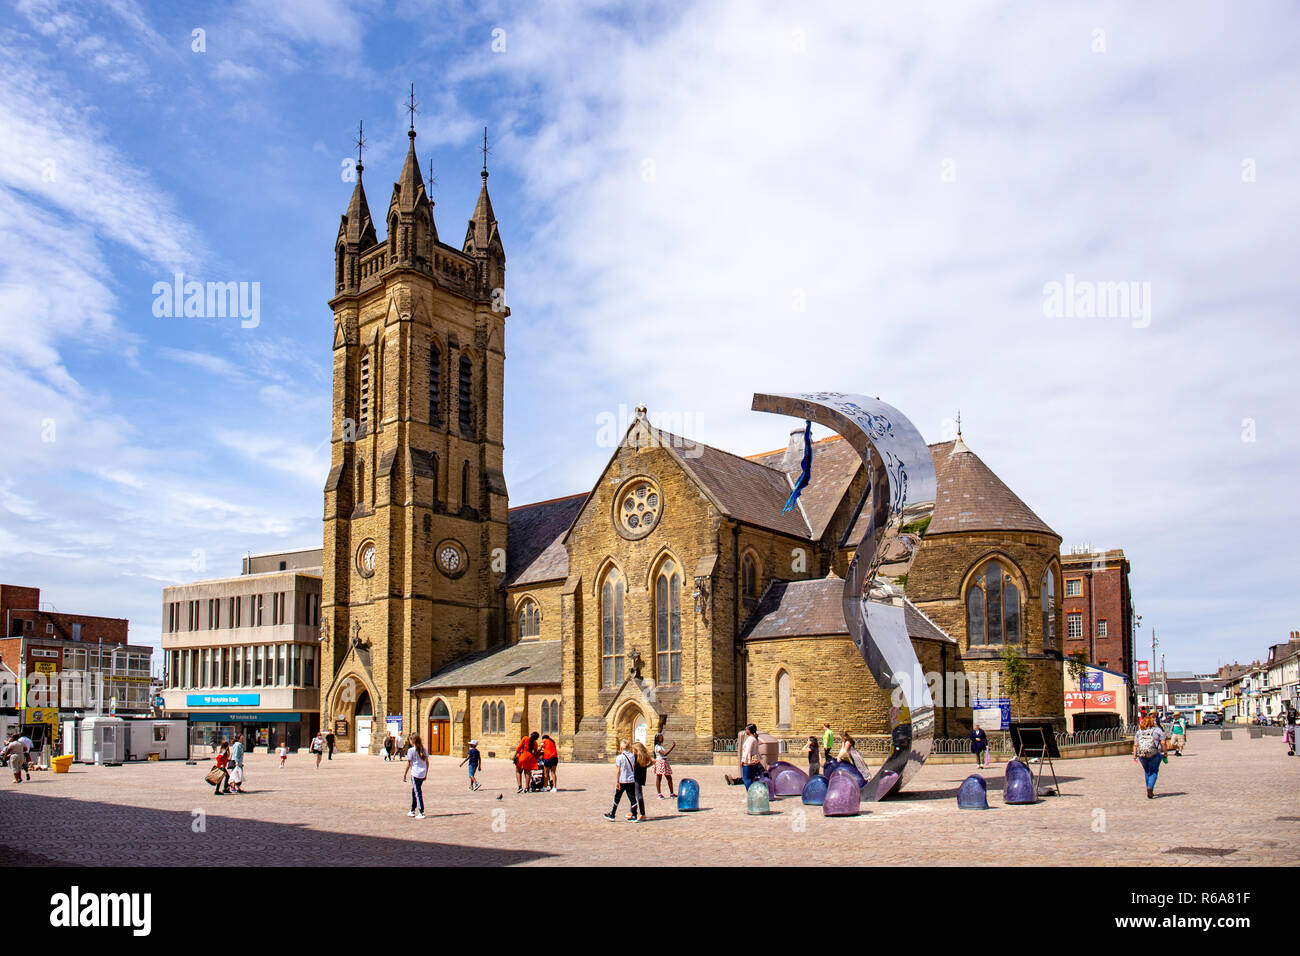 St John's church with the wave sculpture by Lucy Glendinning in St John's Square Blackpool Lancashire UK Stock Photo